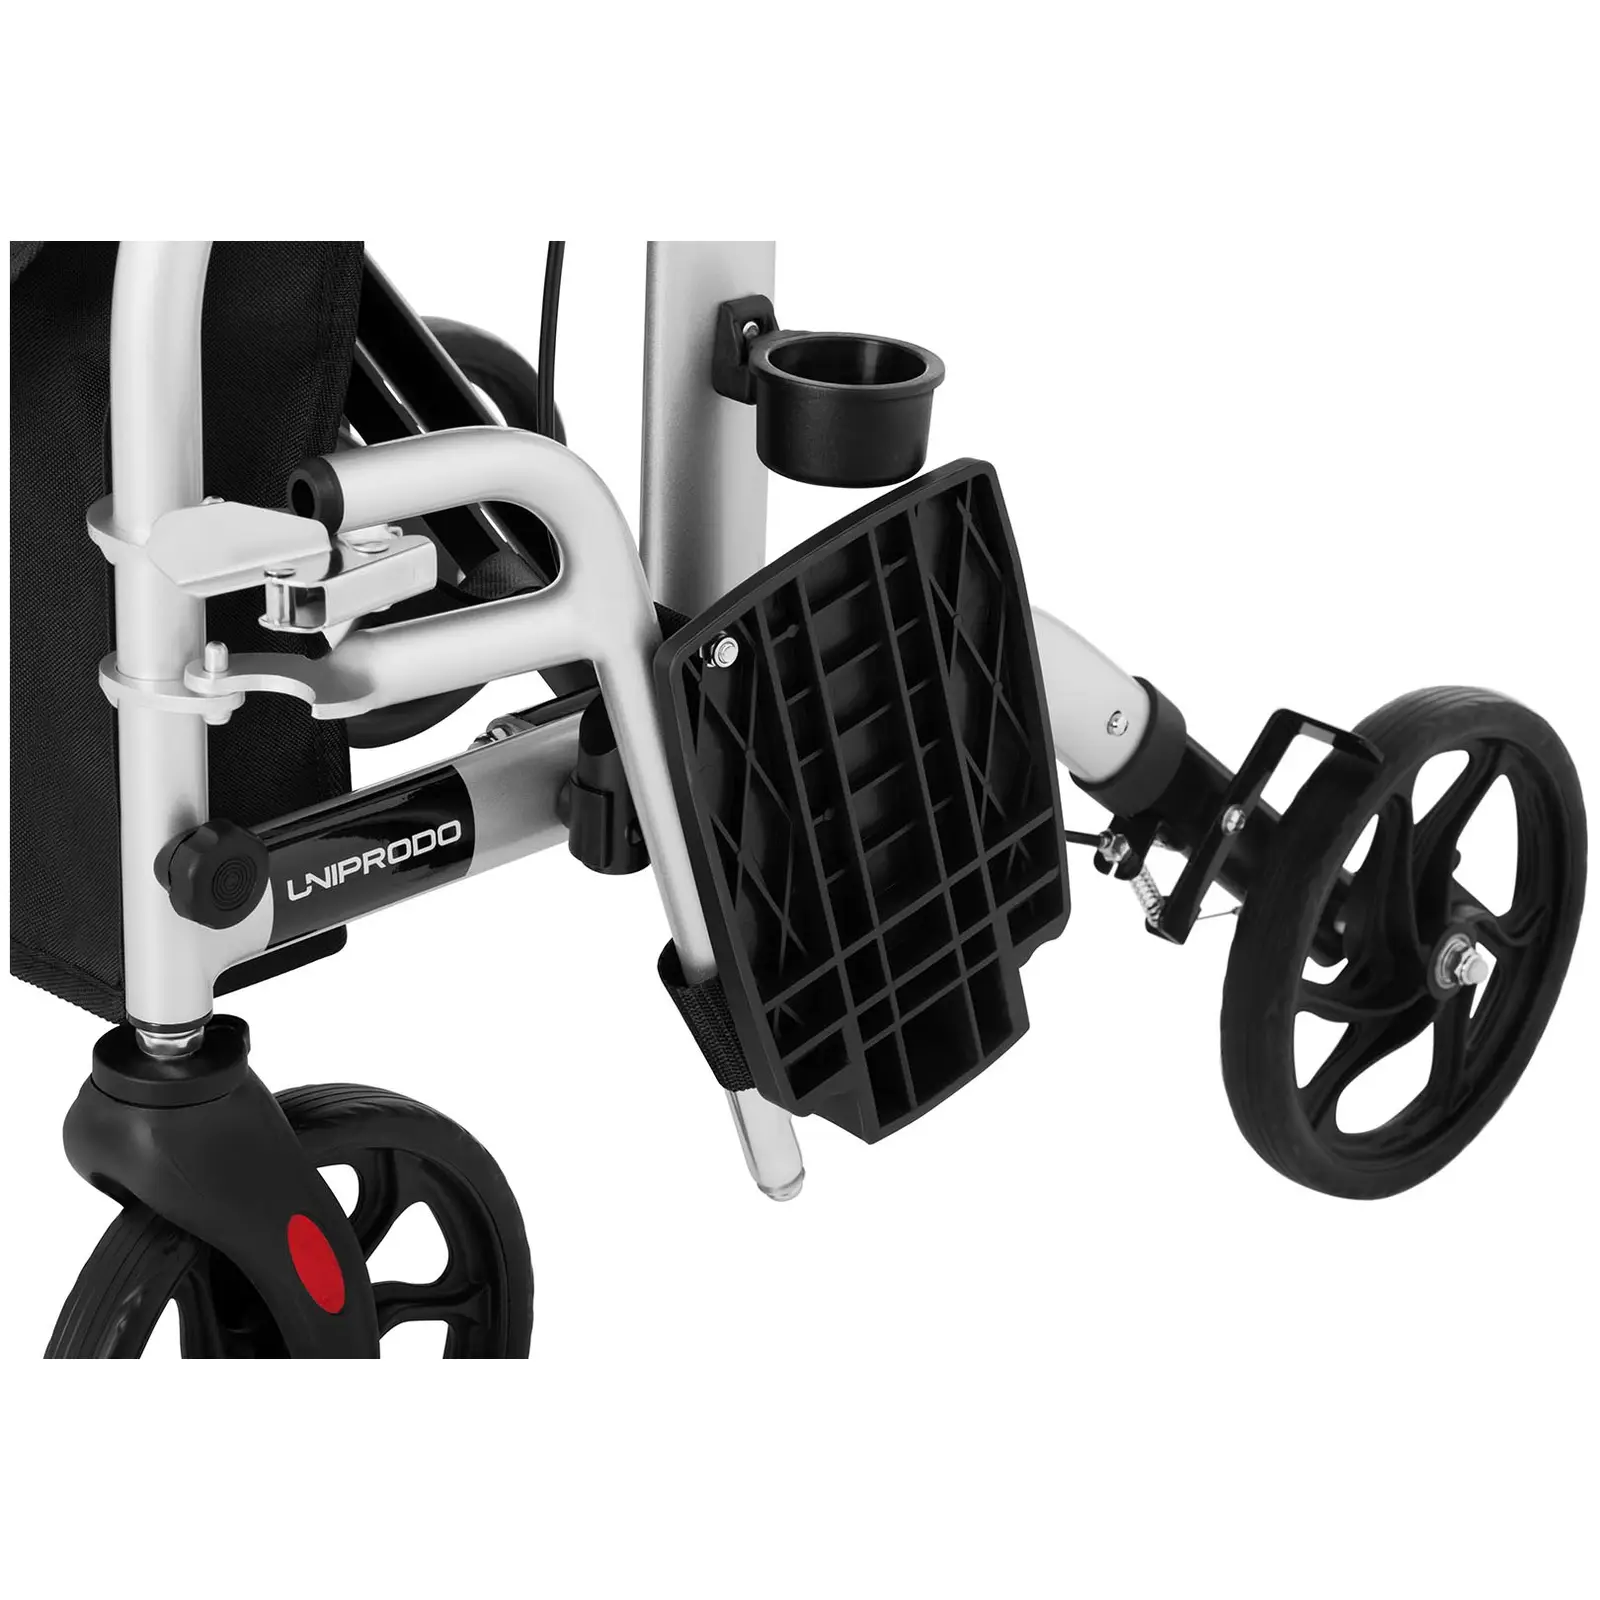 Factory second Rollator Wheelchair 2-in-1 - silver - 120 kg